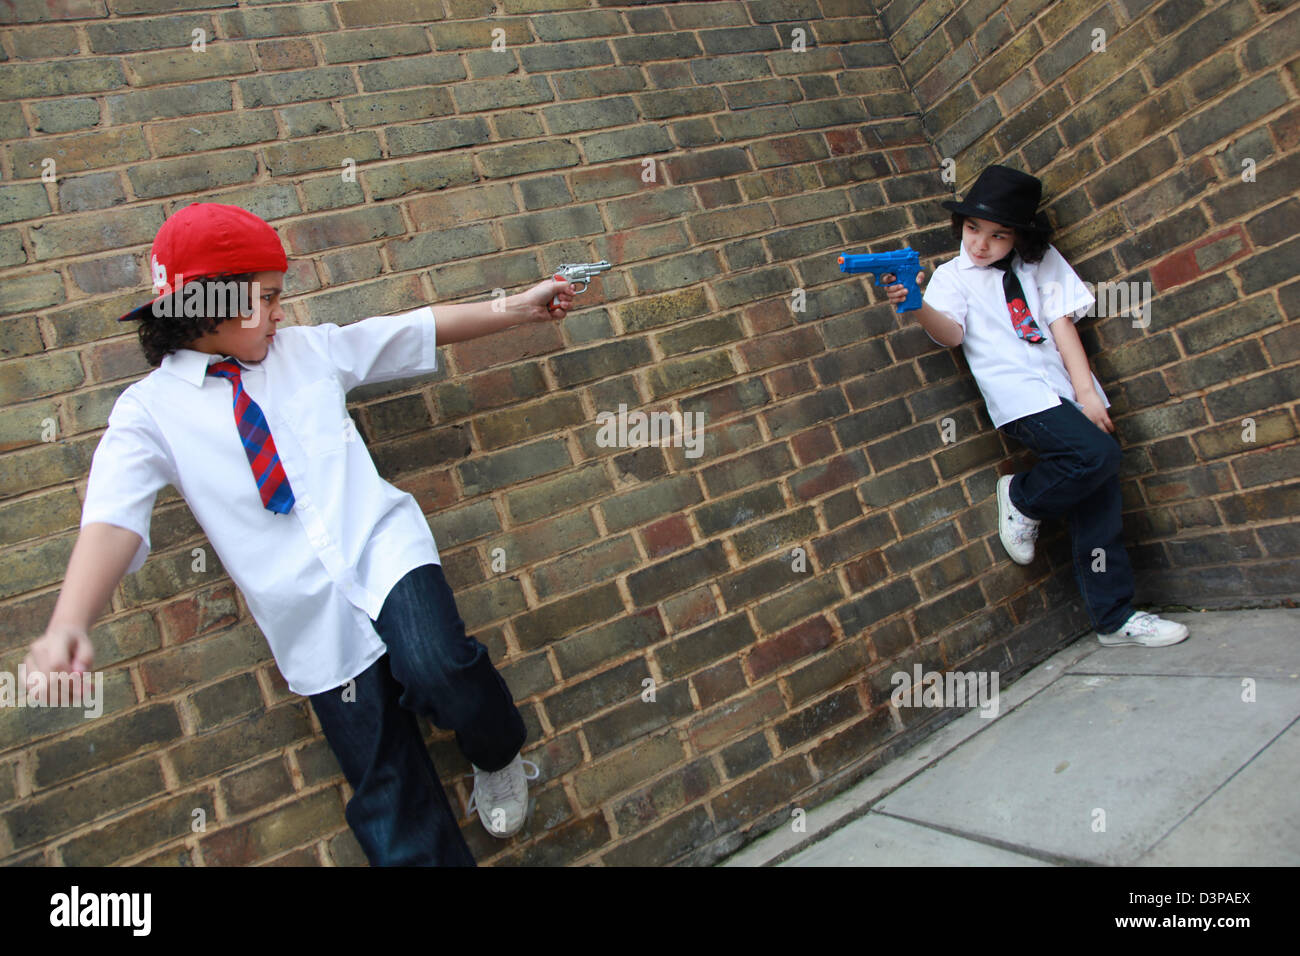 Boys play fighting with toy guns Stock Photo